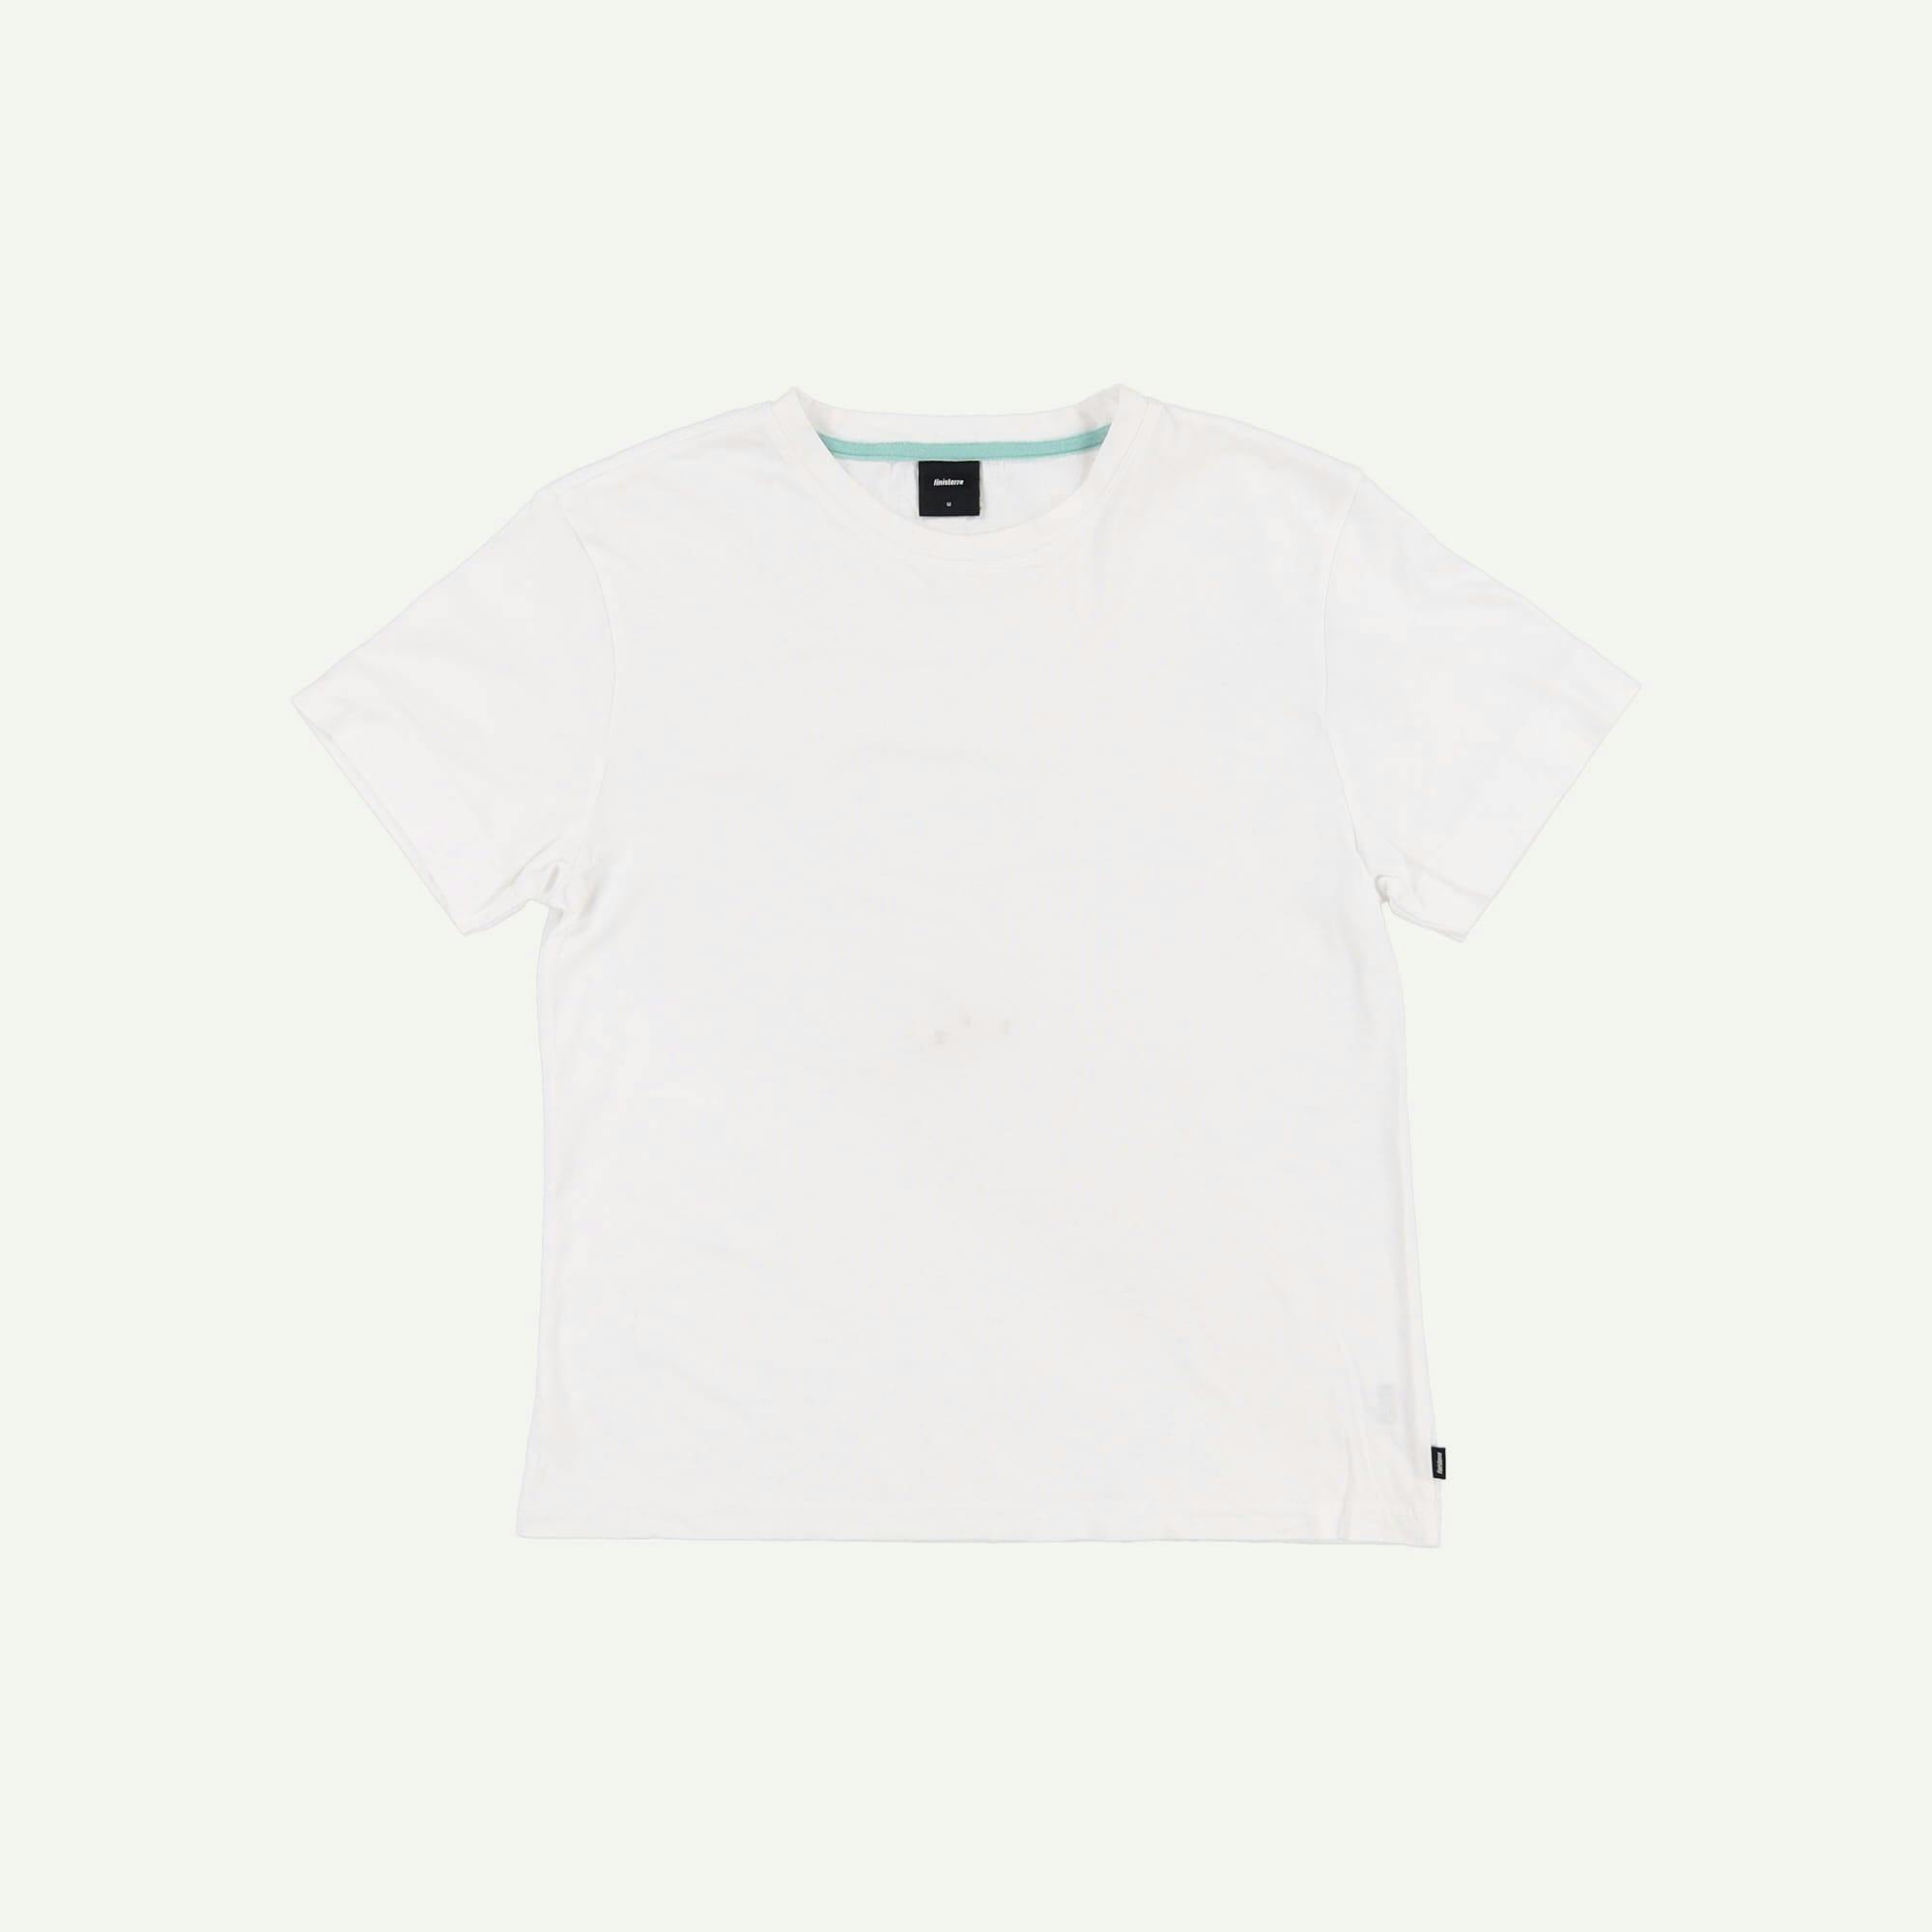 Finisterre Repaired White T-shirt